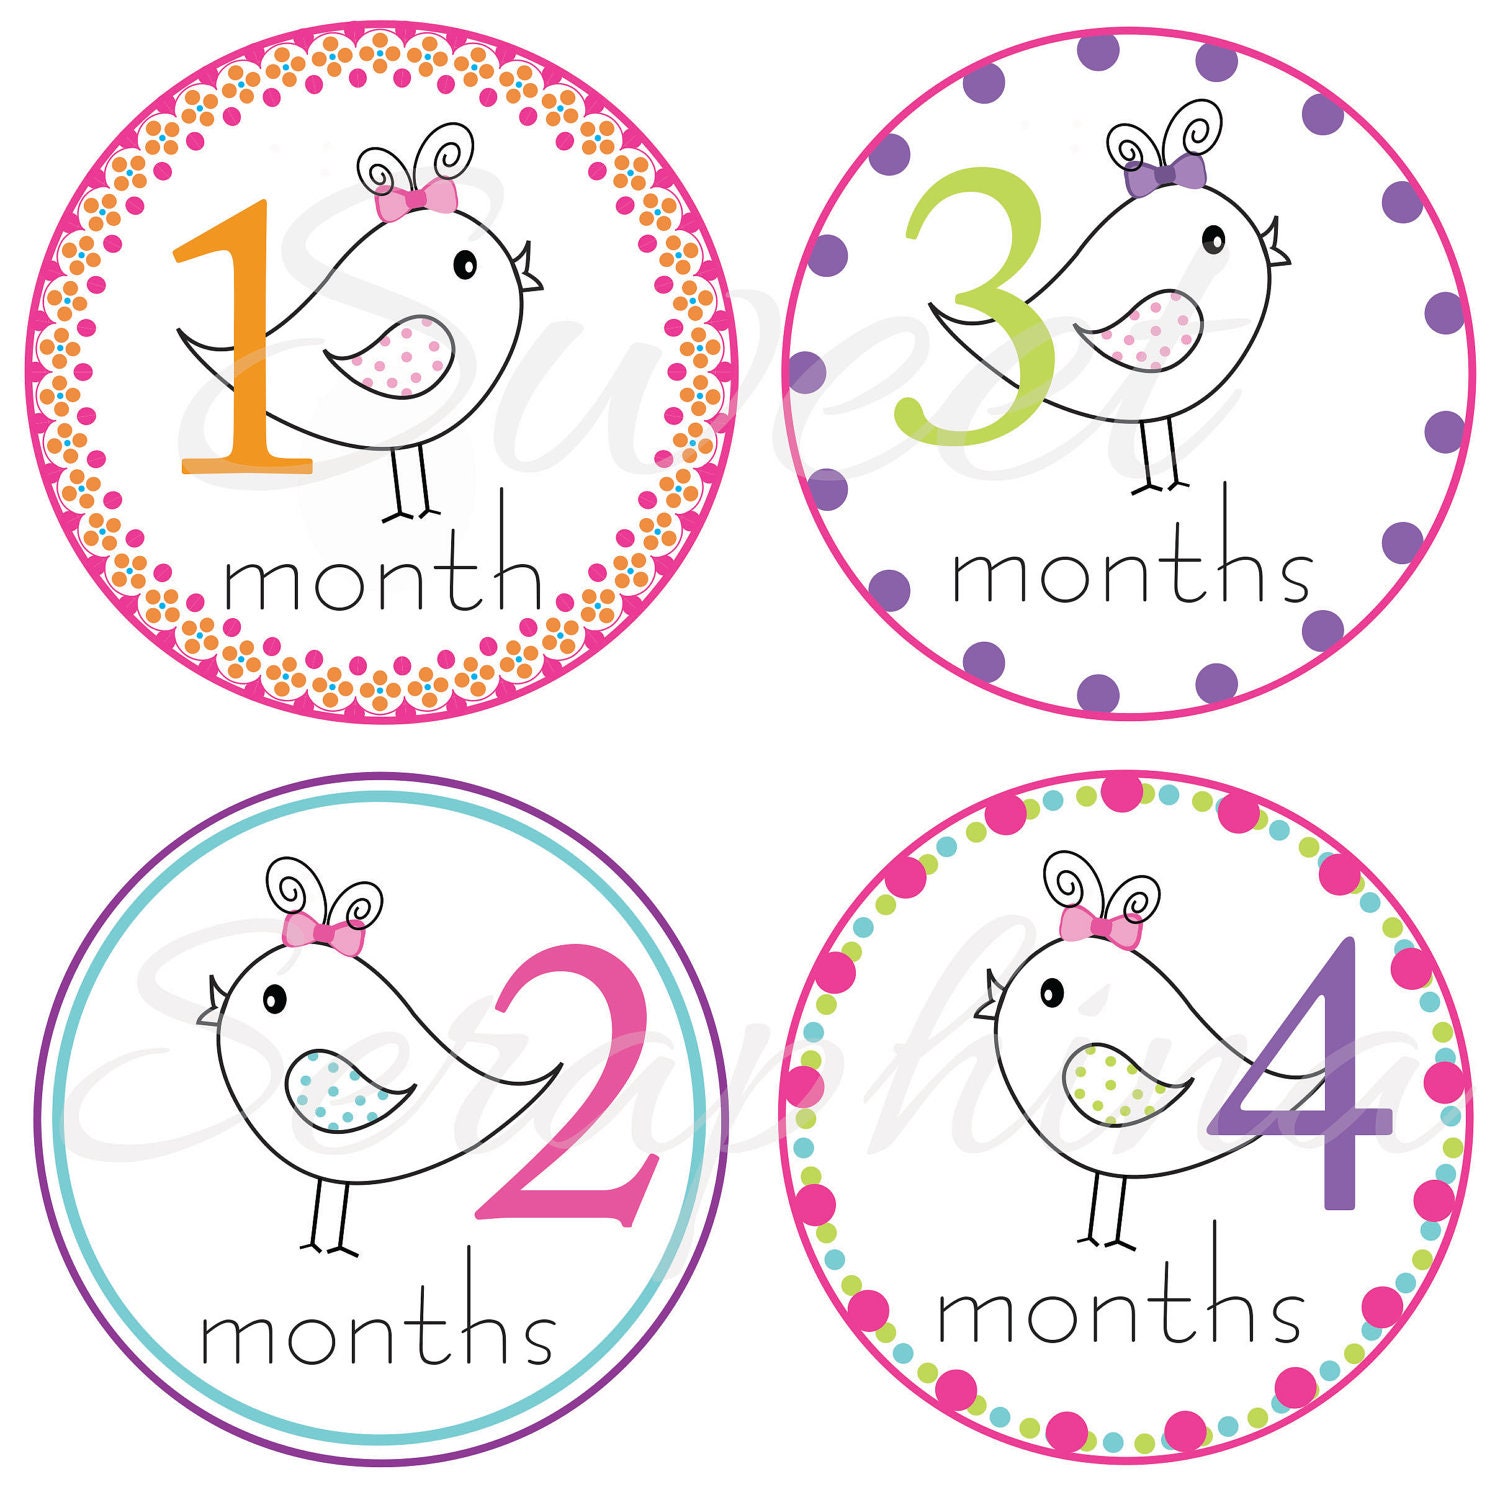 Monthly Stickers for Girls- Birds for Girls - Etsykids Team - Etsy Baby - Bird Stickers - Babys First Year - SweetSeraphina